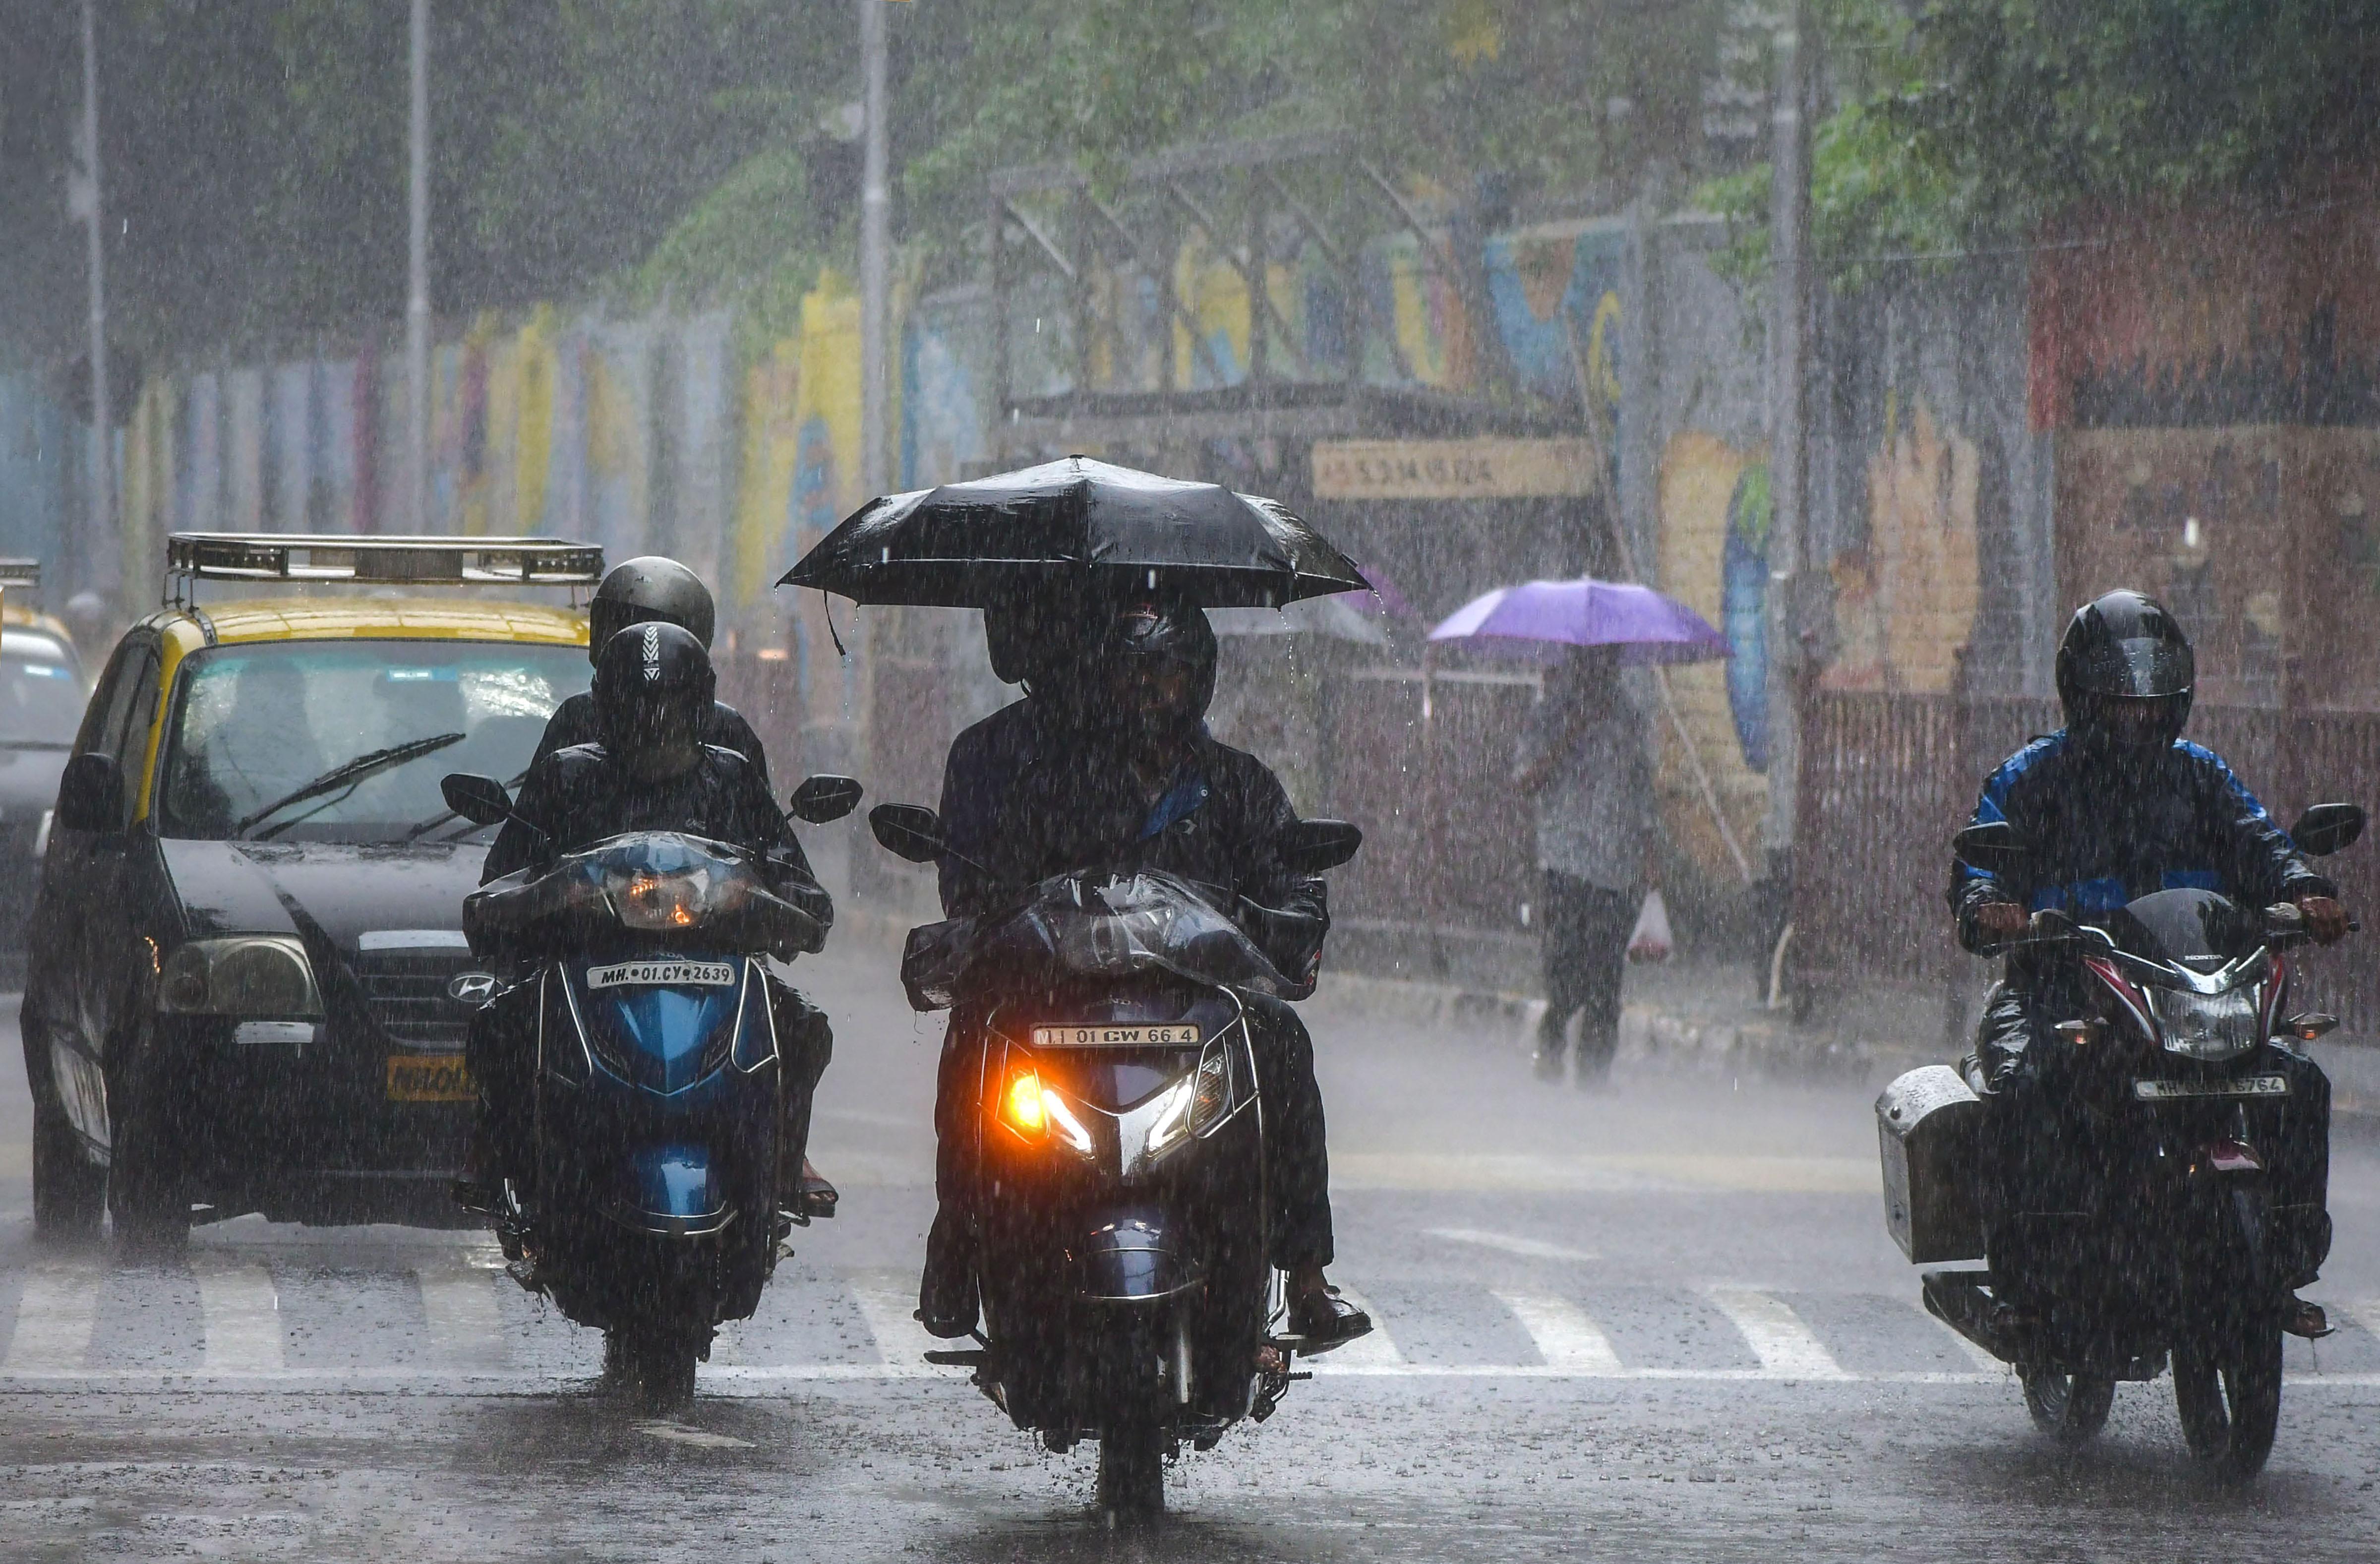 In the 24-hour period ending at 8 am on Thursday, the city recorded 31.8 mm rainfall, while the eastern and western suburbs received 36.23 mm and 29.67 mm downpour respectively. Pic/PTI